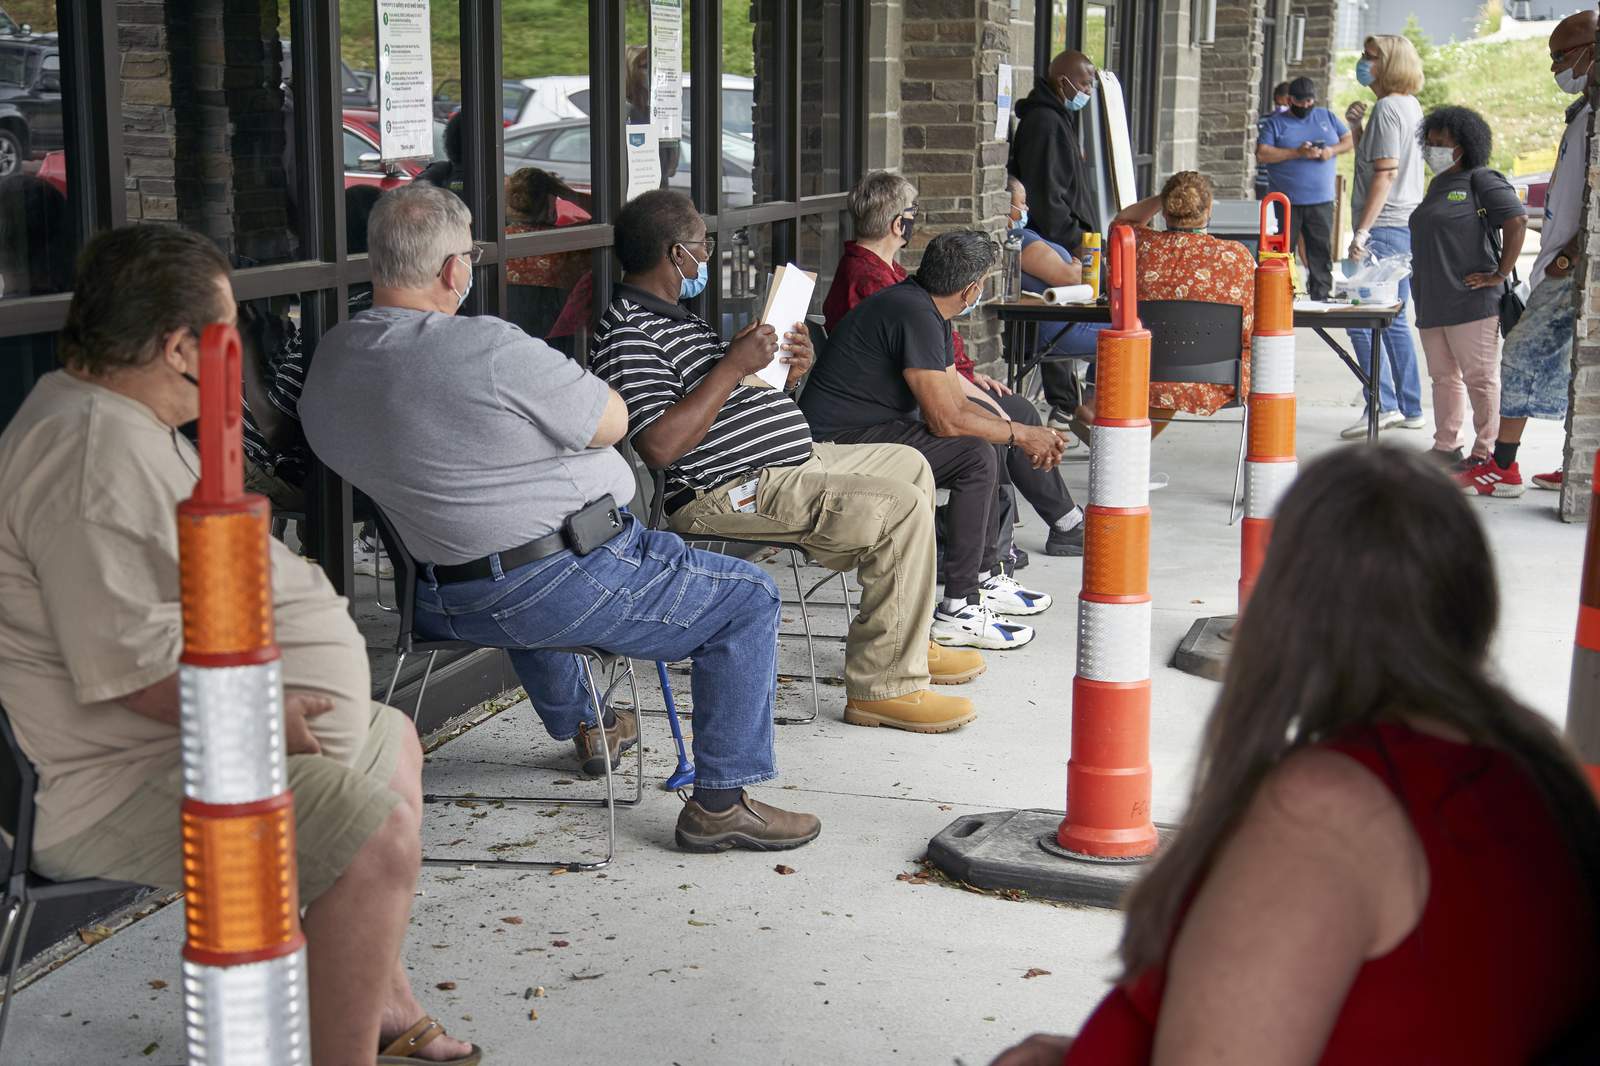 GOP's jobless benefit plan could mean delays, states warn